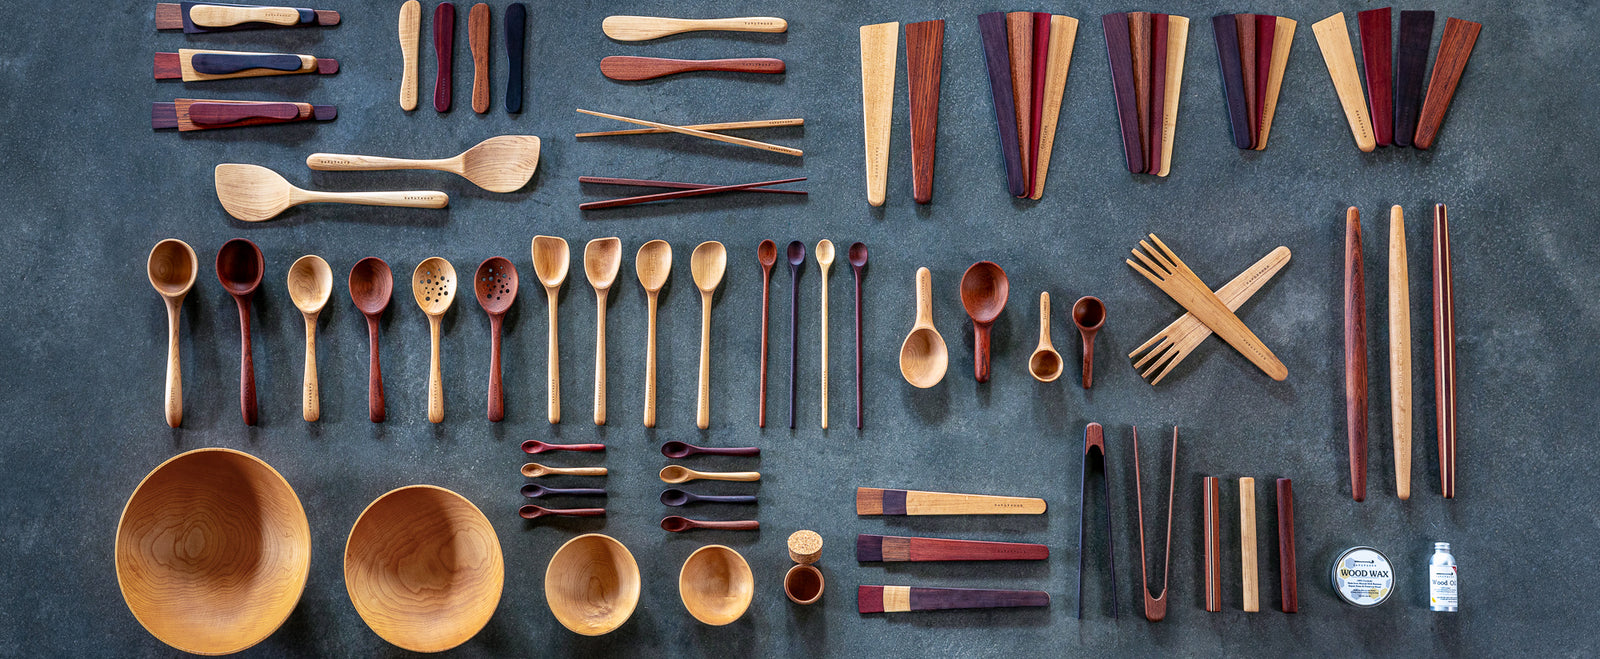 Beautiful cooking utensil set that is made of sustainable and